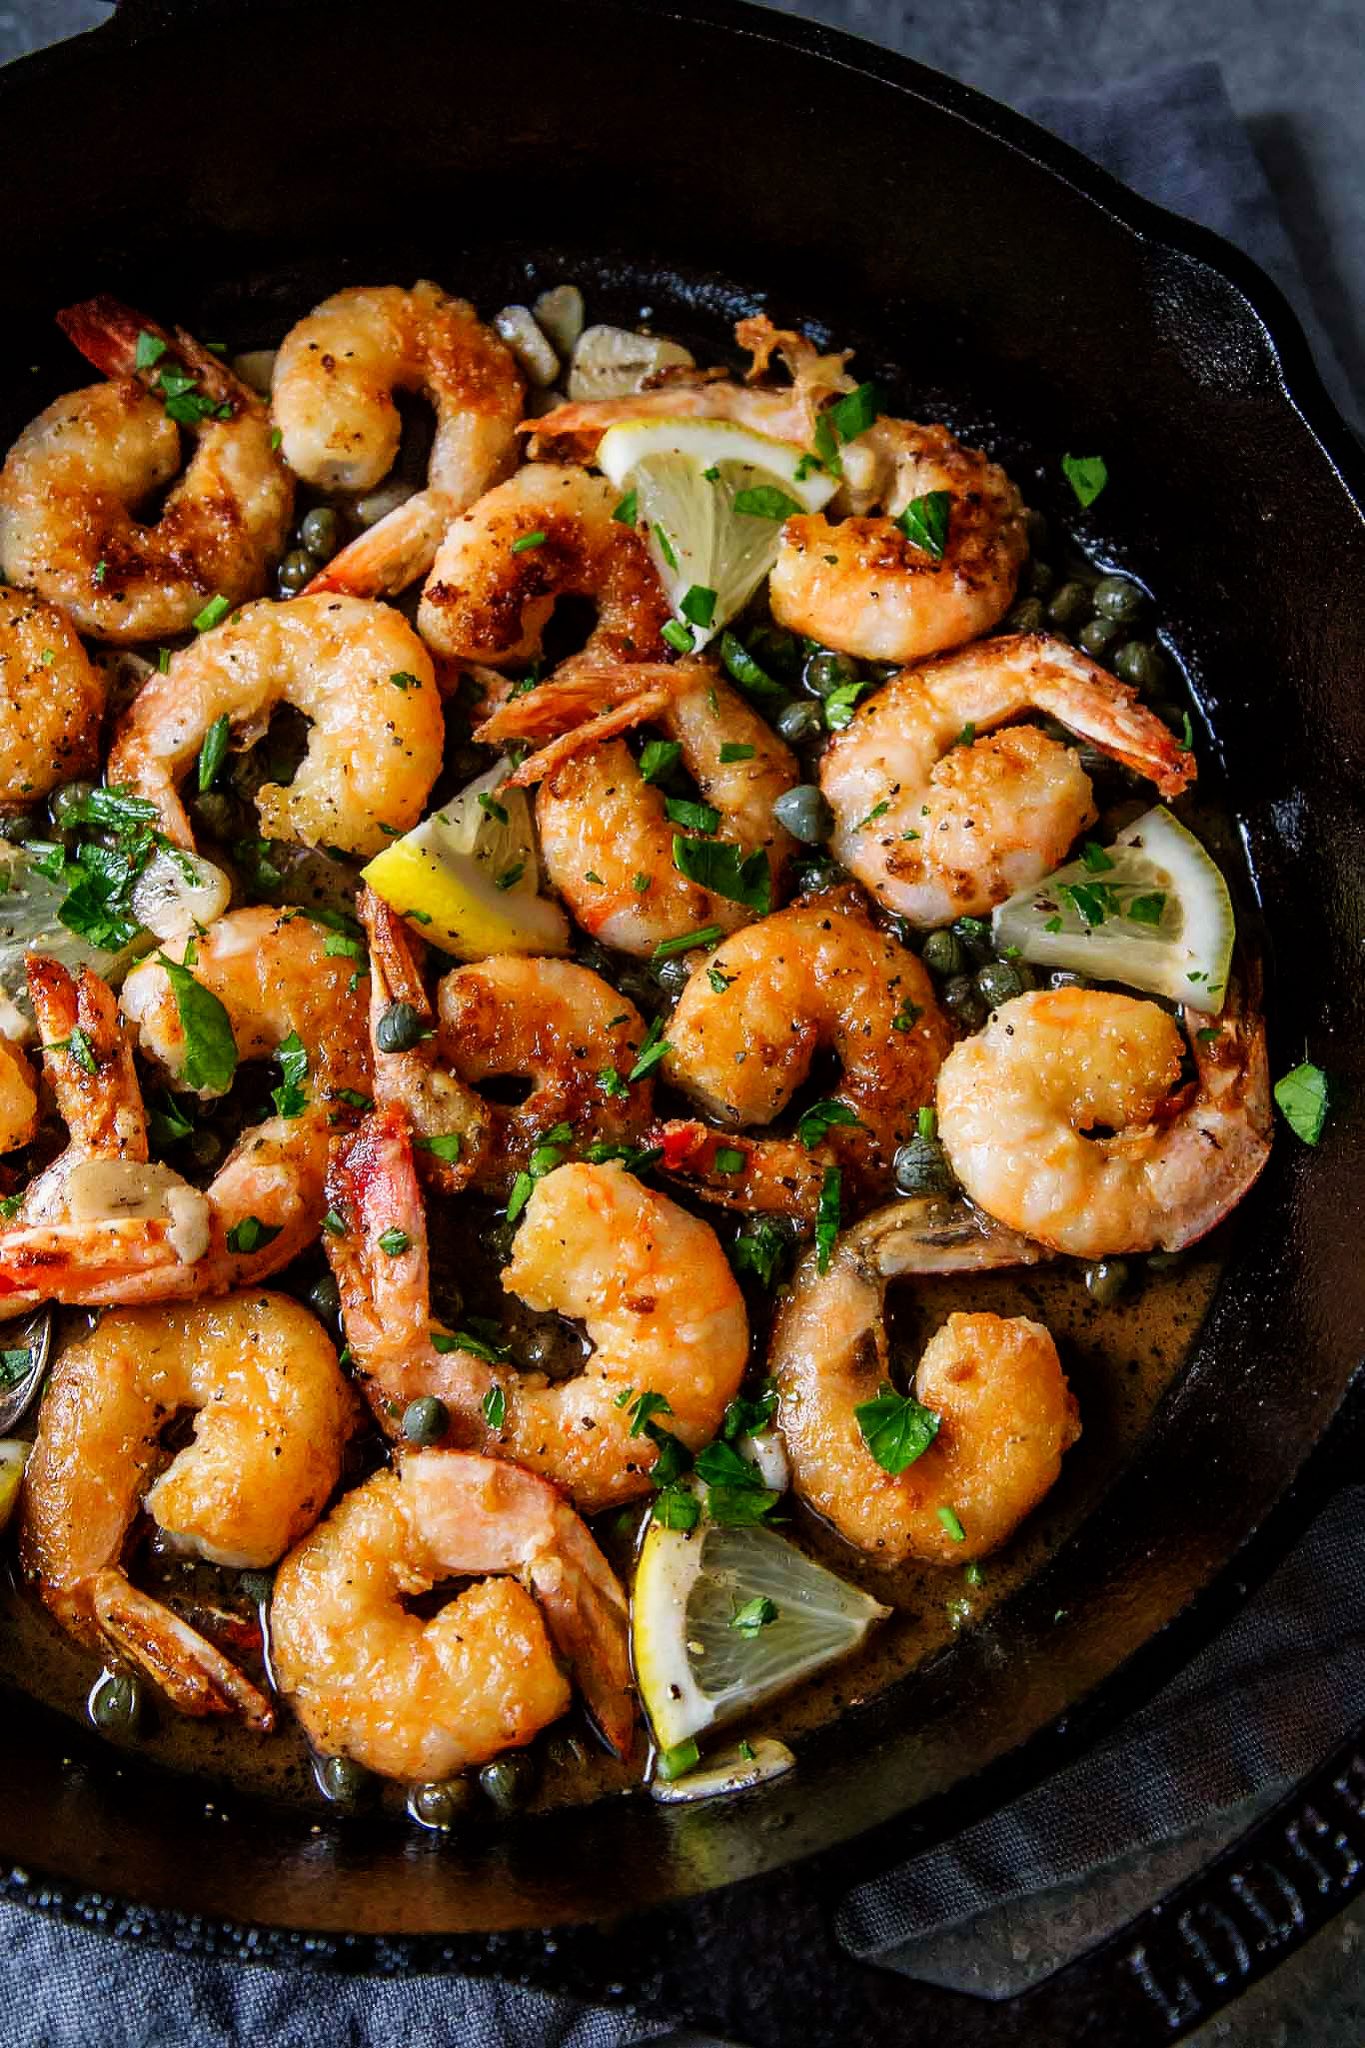 30-Minute Easy Shrimp Piccata makes a delicious appetizer, or serve the piccata over pasta for dinner. Shrimp are tossed in a lemon, garlic, butter sauce flecked with capers.